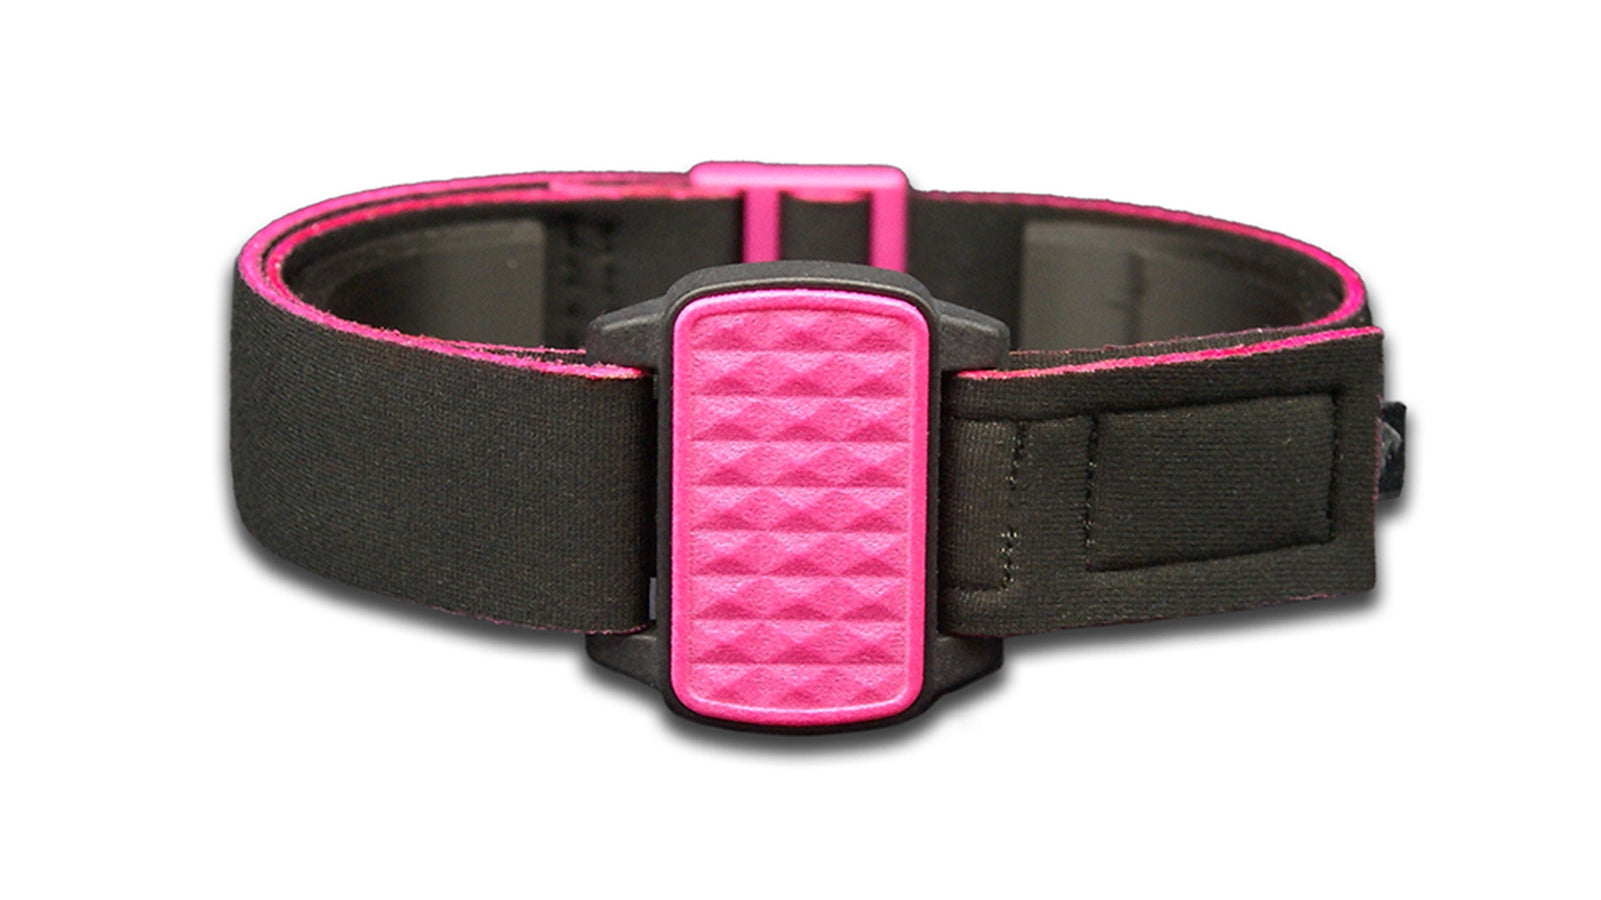 Dexband armband with magenta pyramids cover. Black strap edged in coordinating magenta.